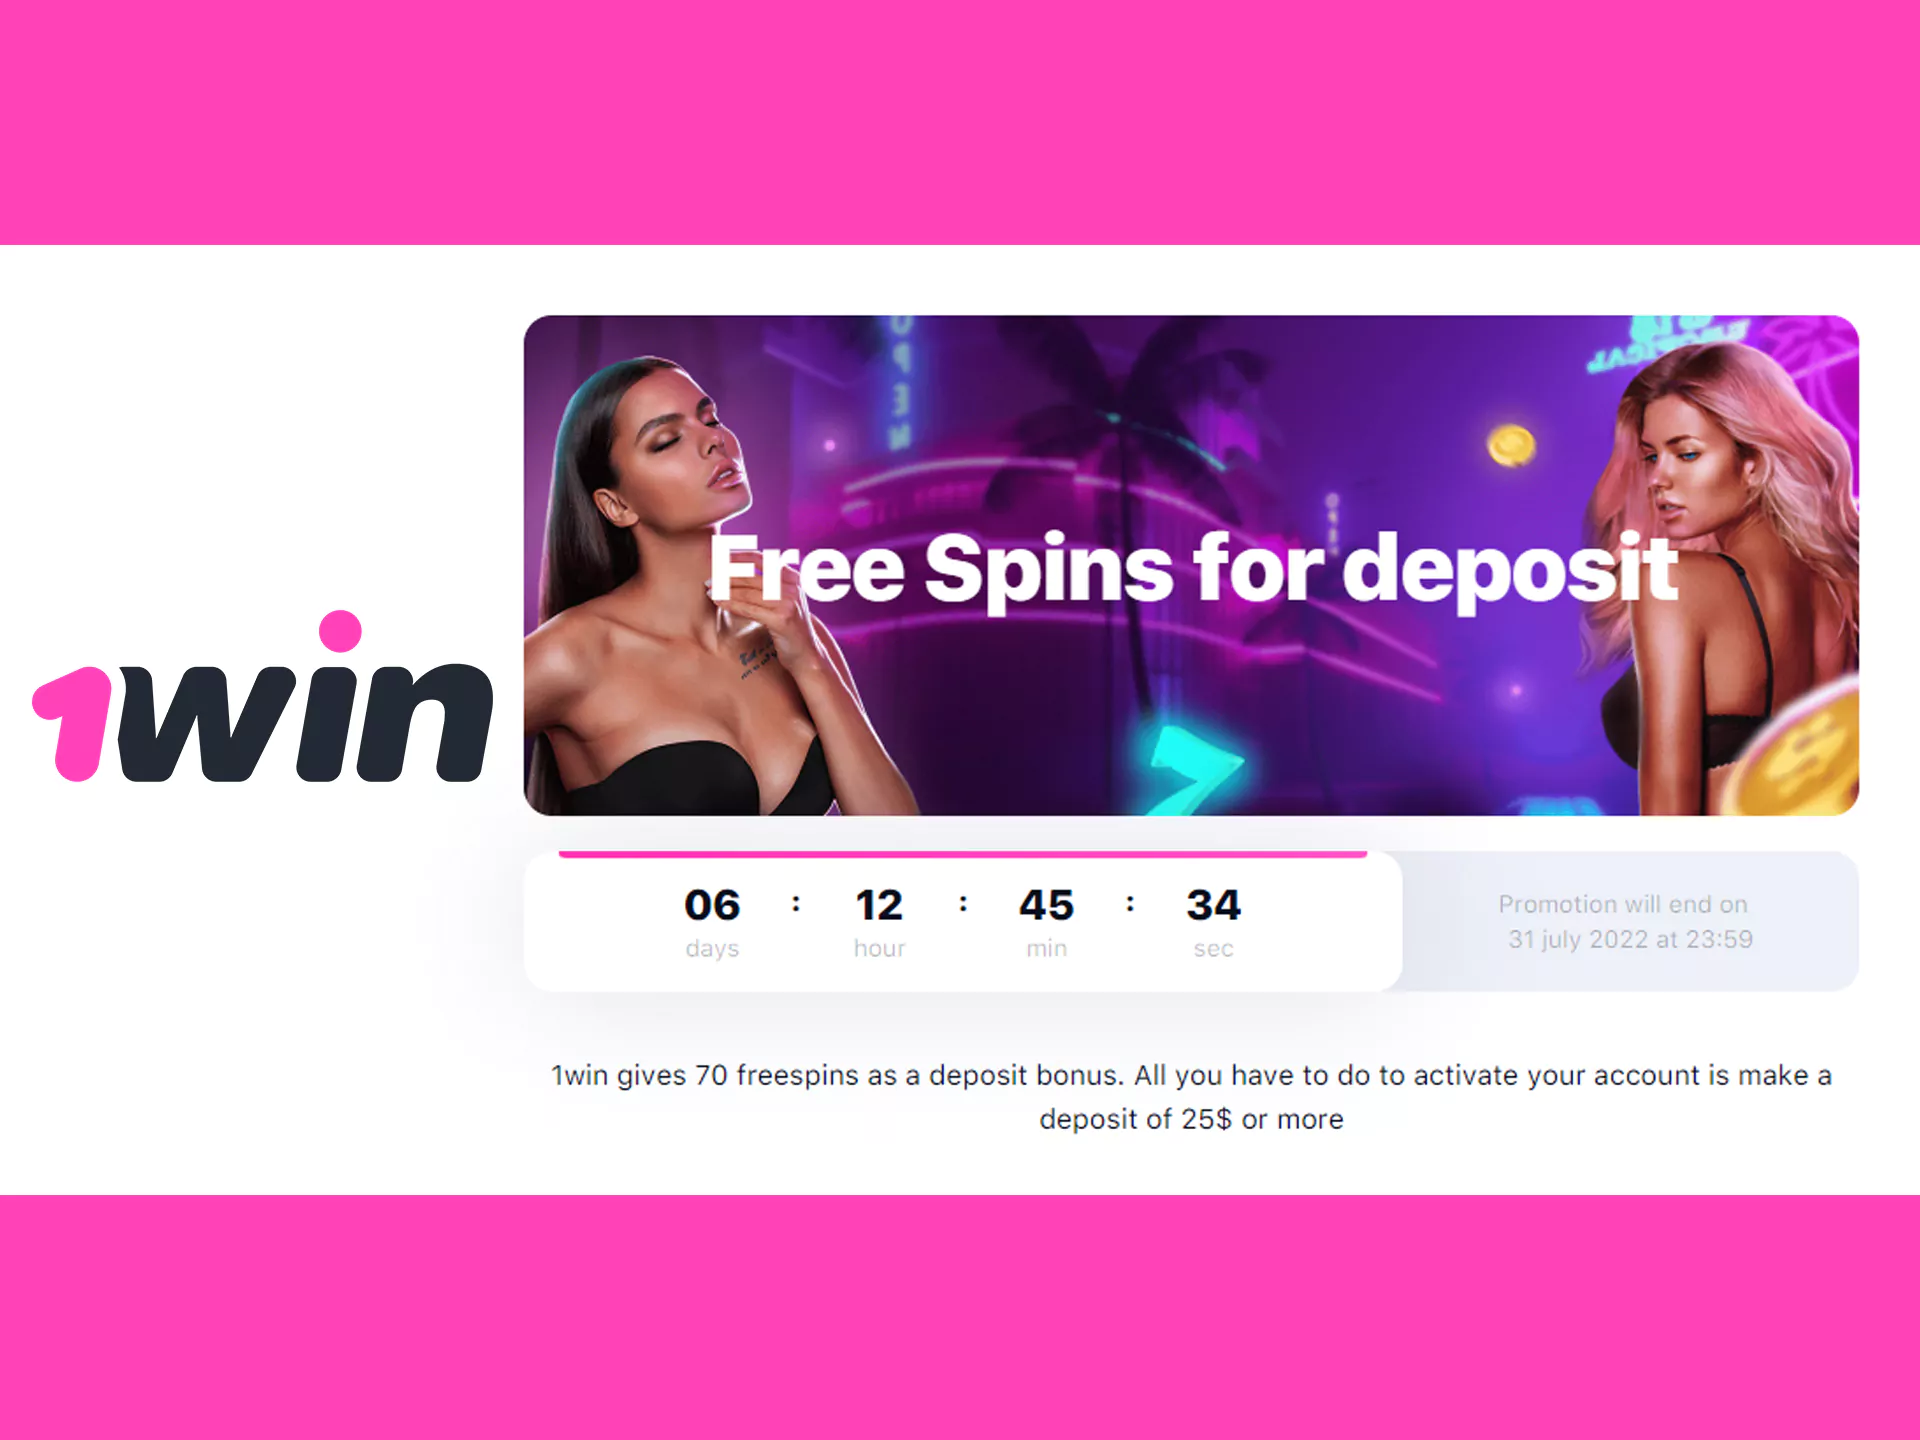 You can get free spins after first deposit.